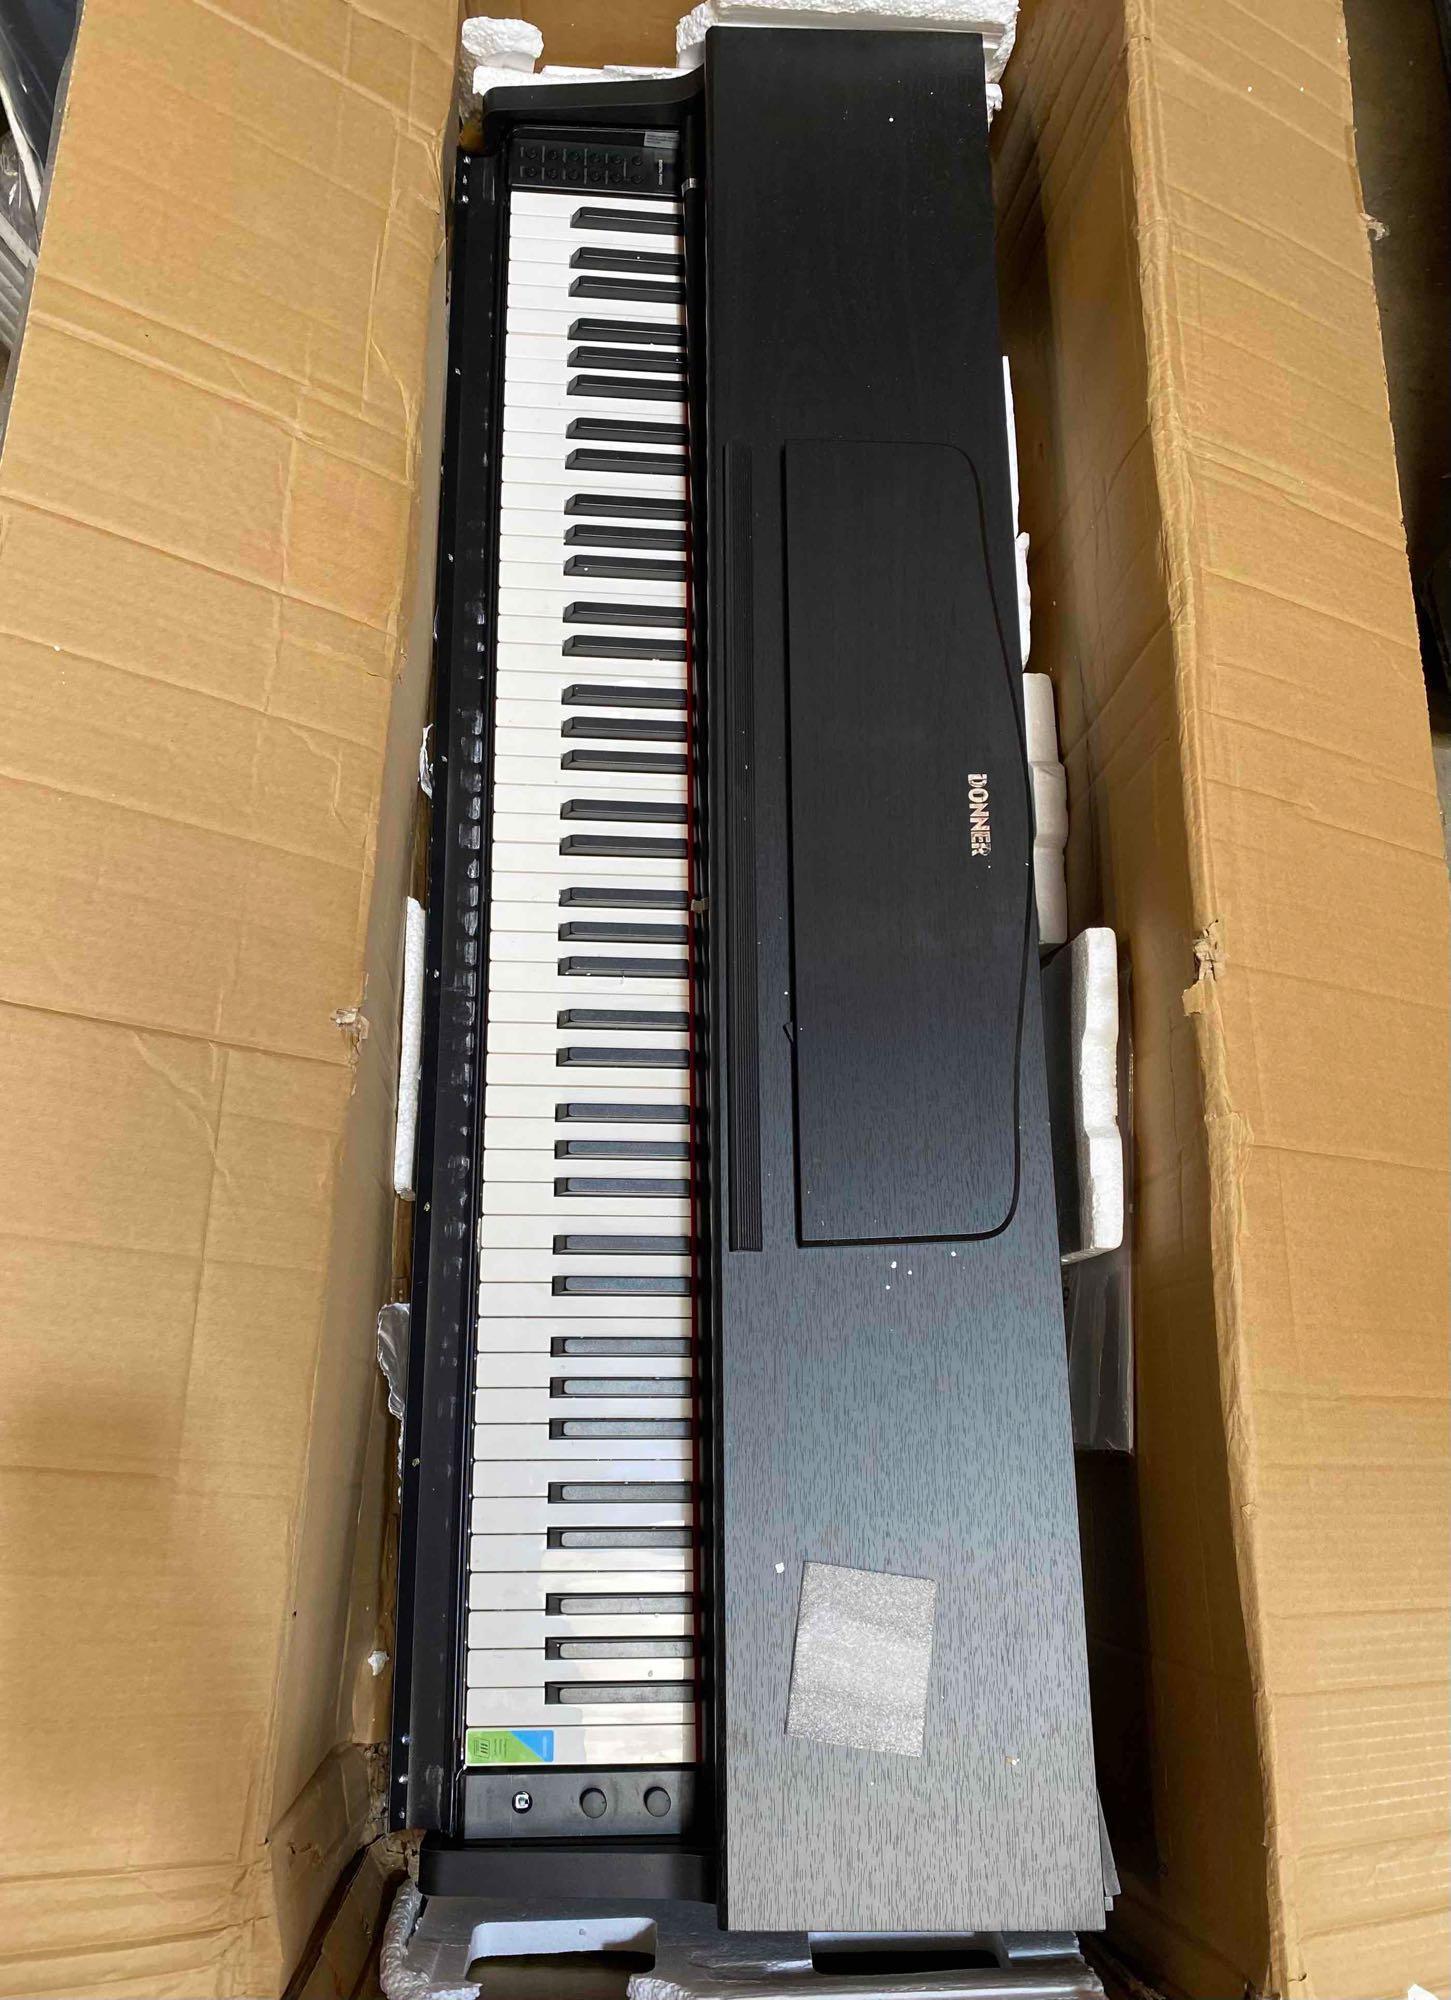 Donner DDP-100 88-Key Weighted Action Digital Piano